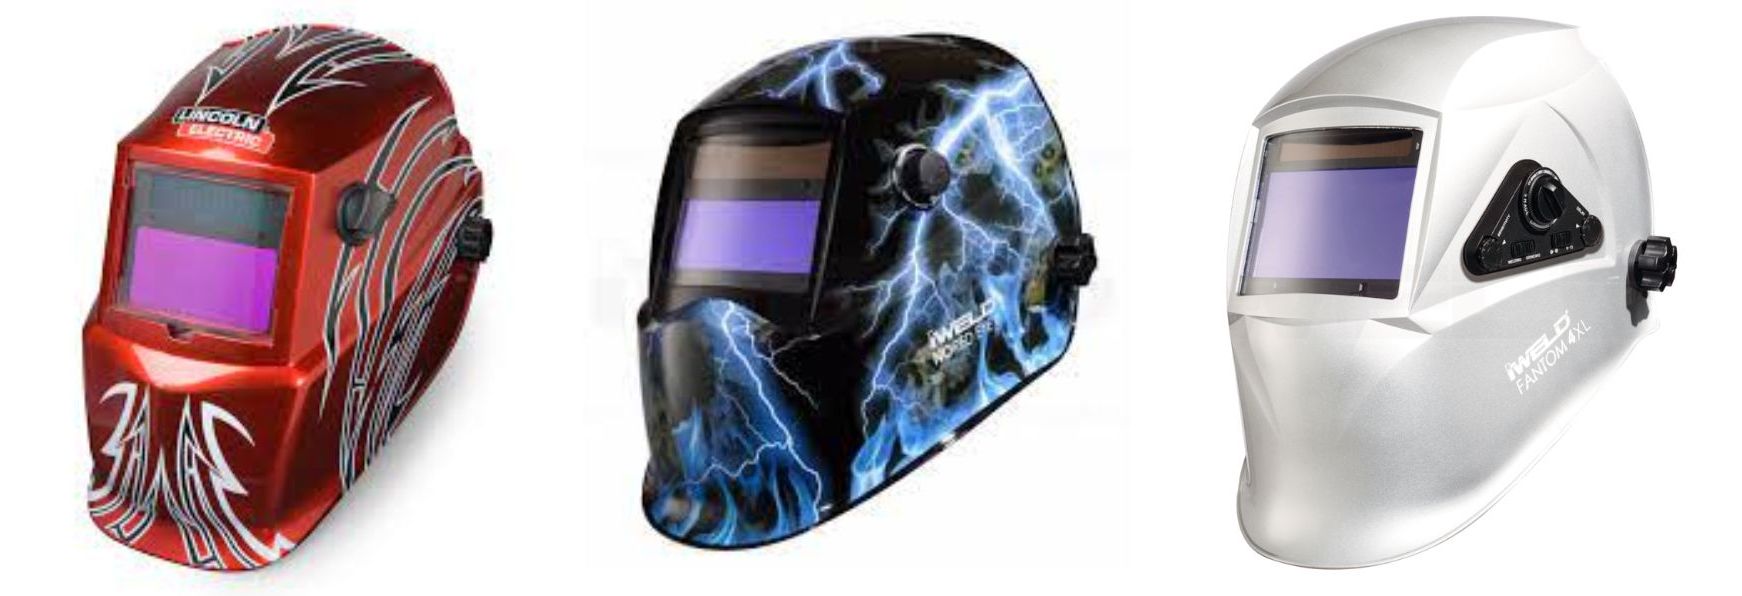 Images of 3 welding helmets in various colors